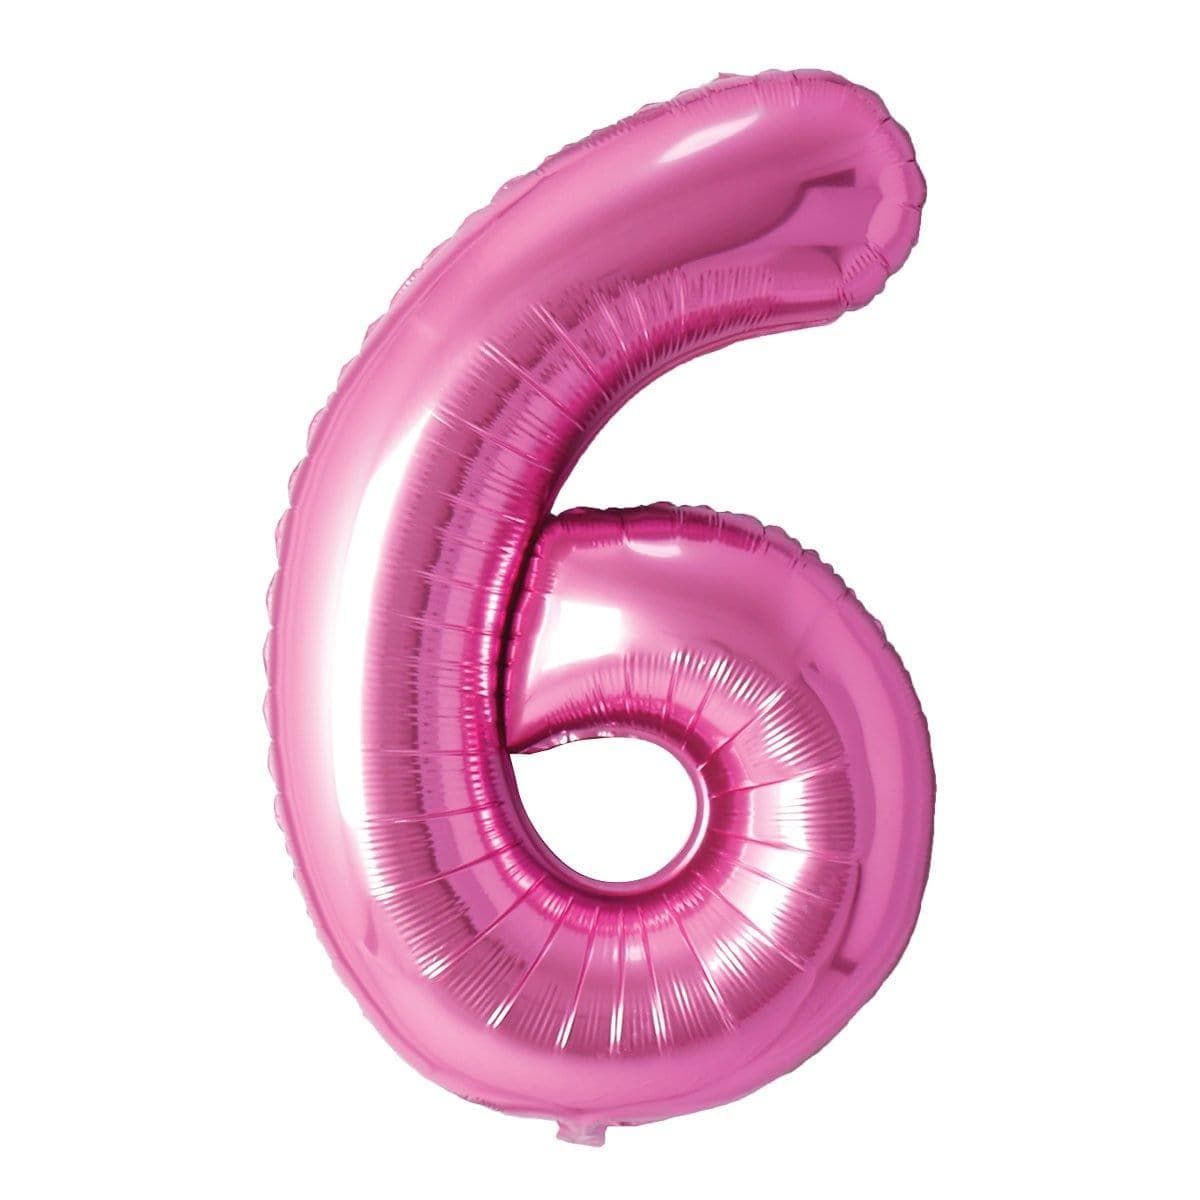 Buy Balloons Pink Number 6 Foil Balloon, 34 Inches sold at Party Expert